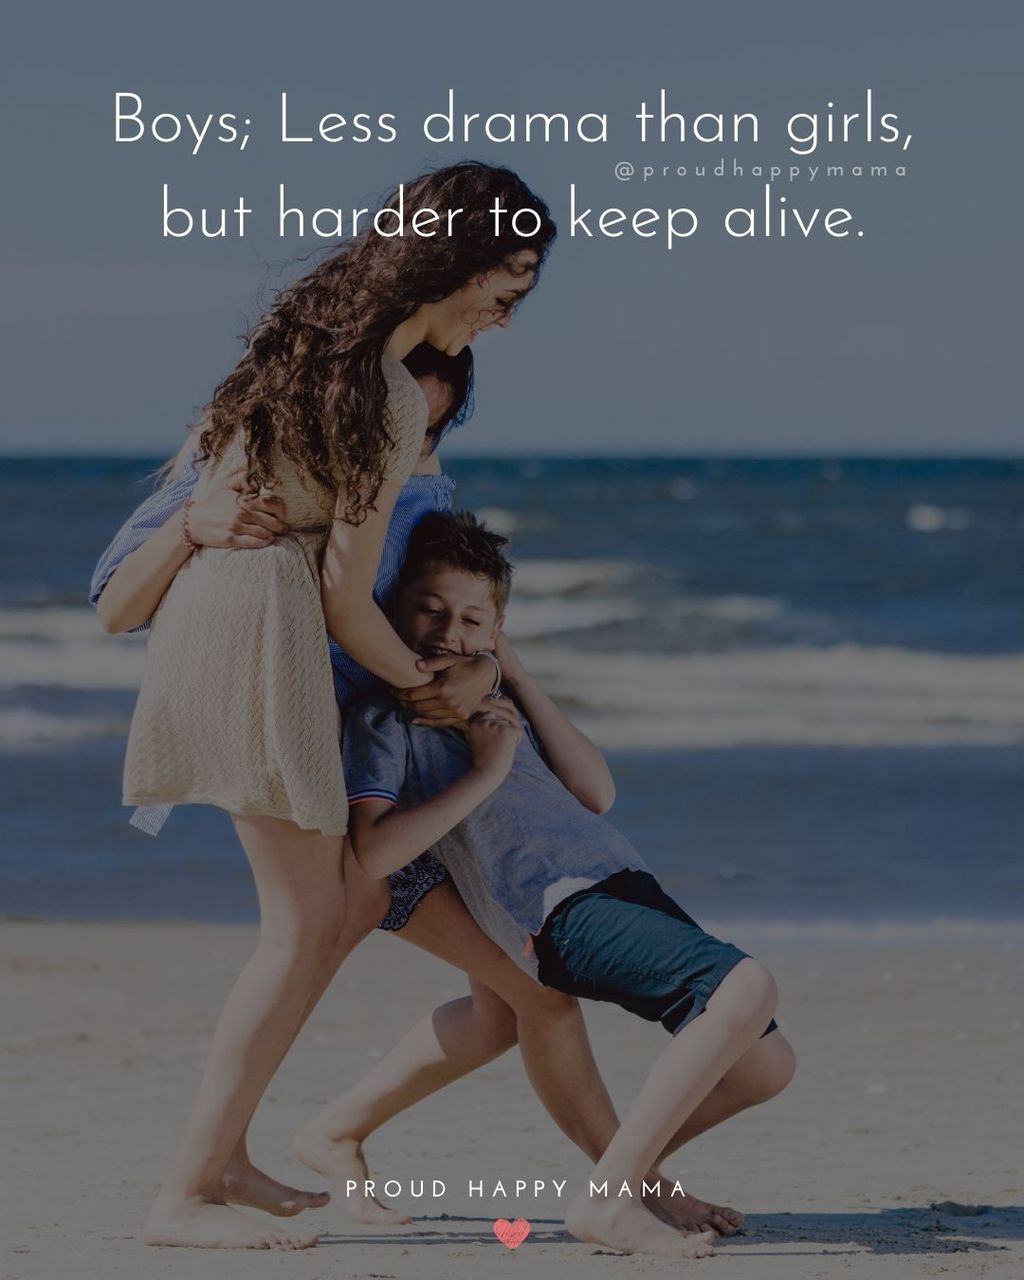 Boy Mom Quotes - Boys; Less drama than girls, but harder to keep alive.